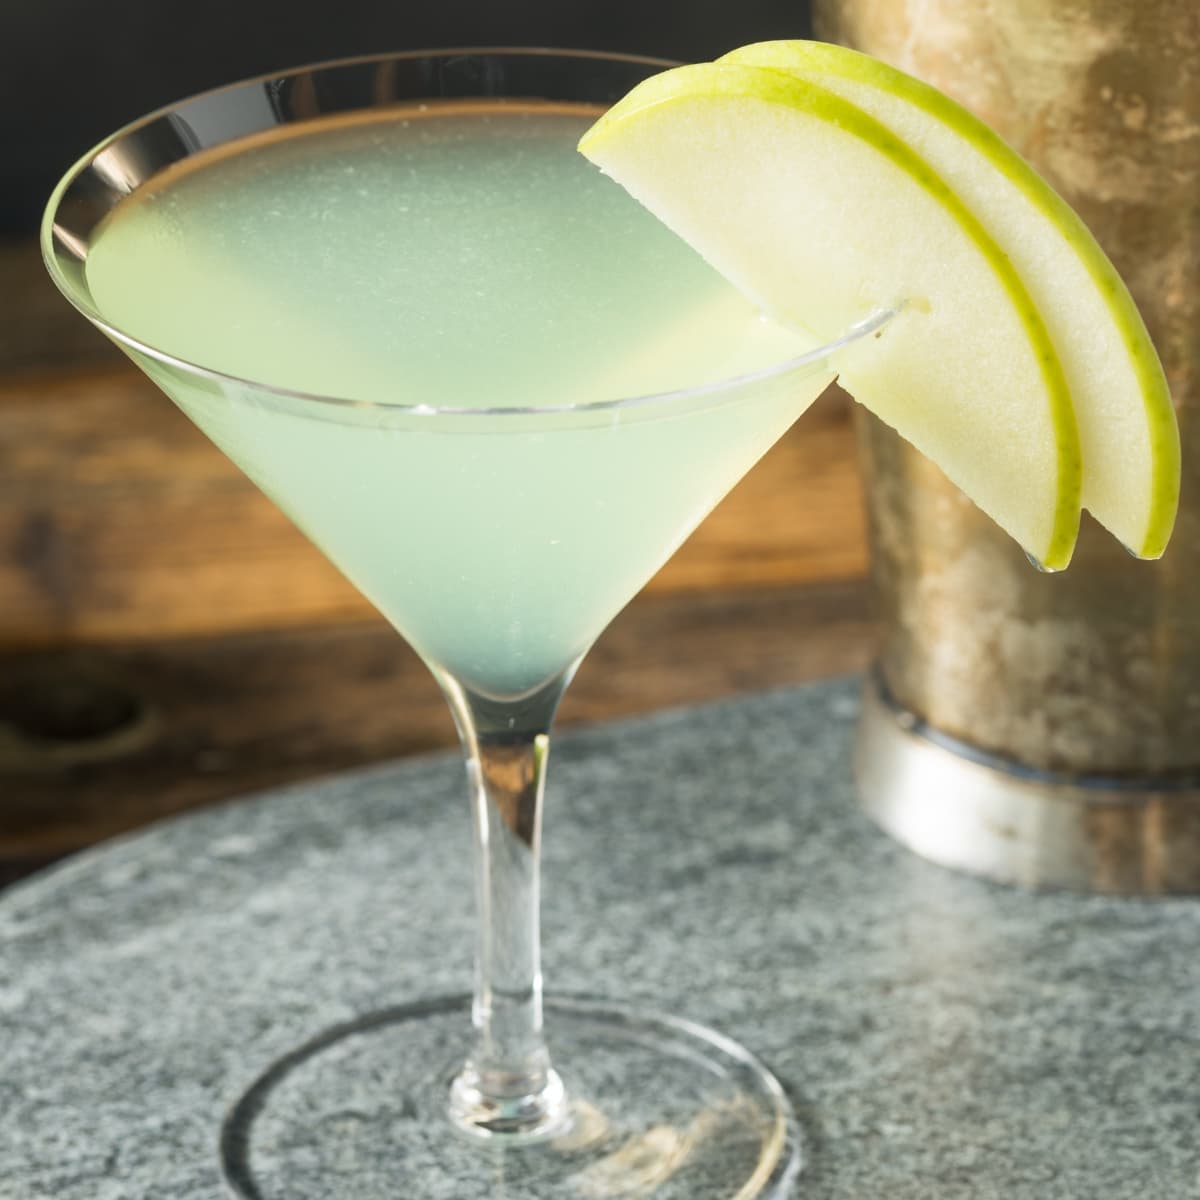 Appletini cocktail in a martini glass garnished with two slices of green apples.